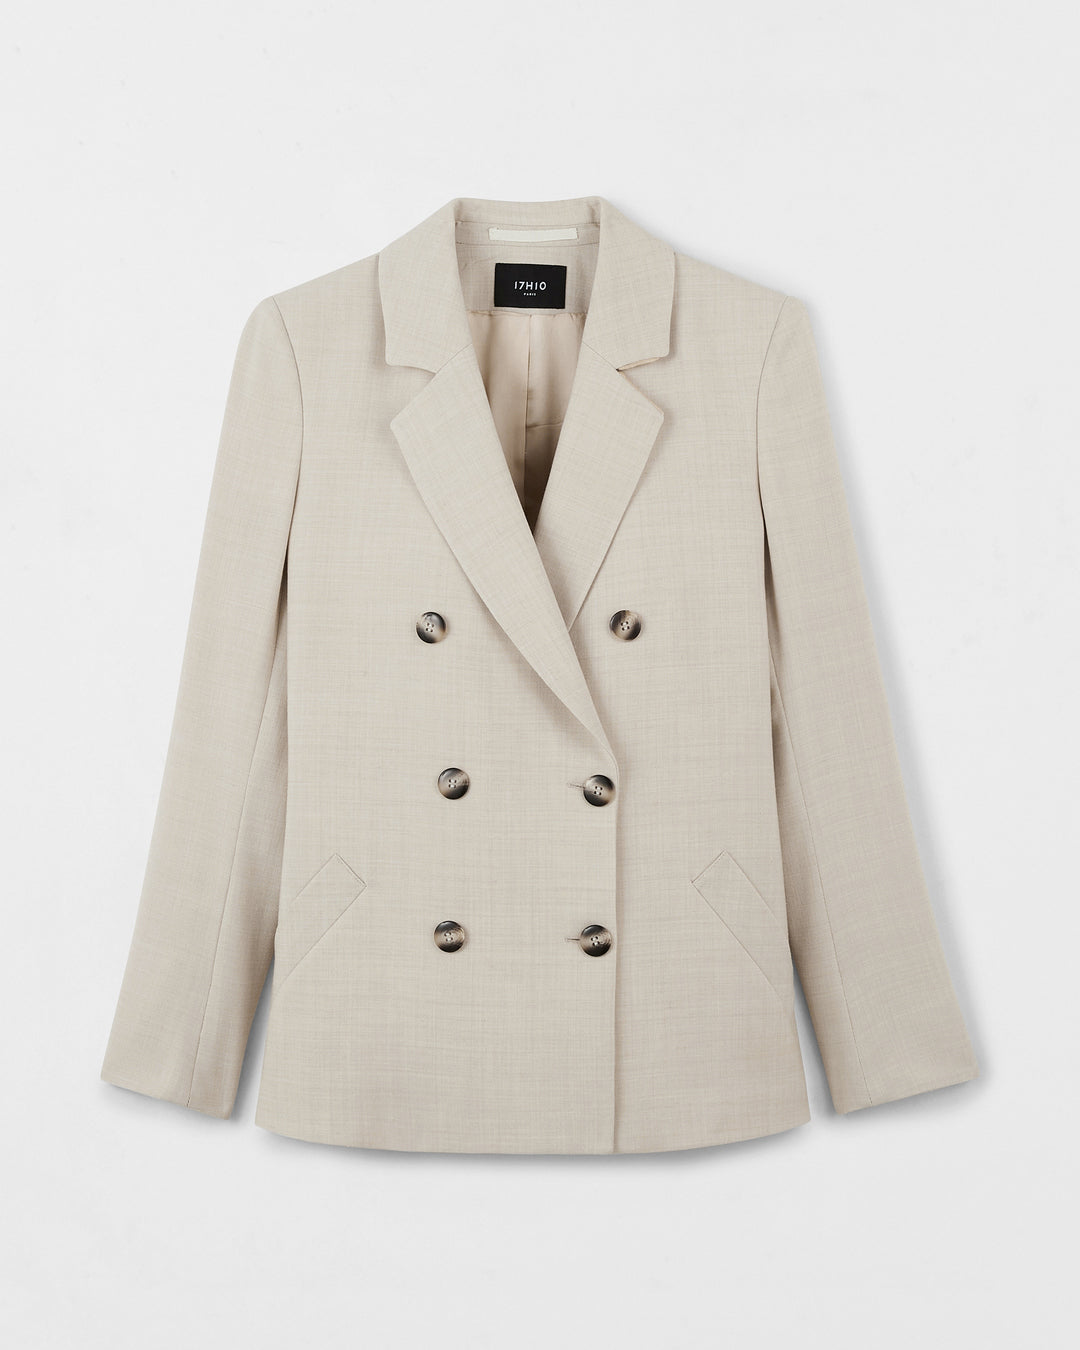 Moscow suit jacket - Sable